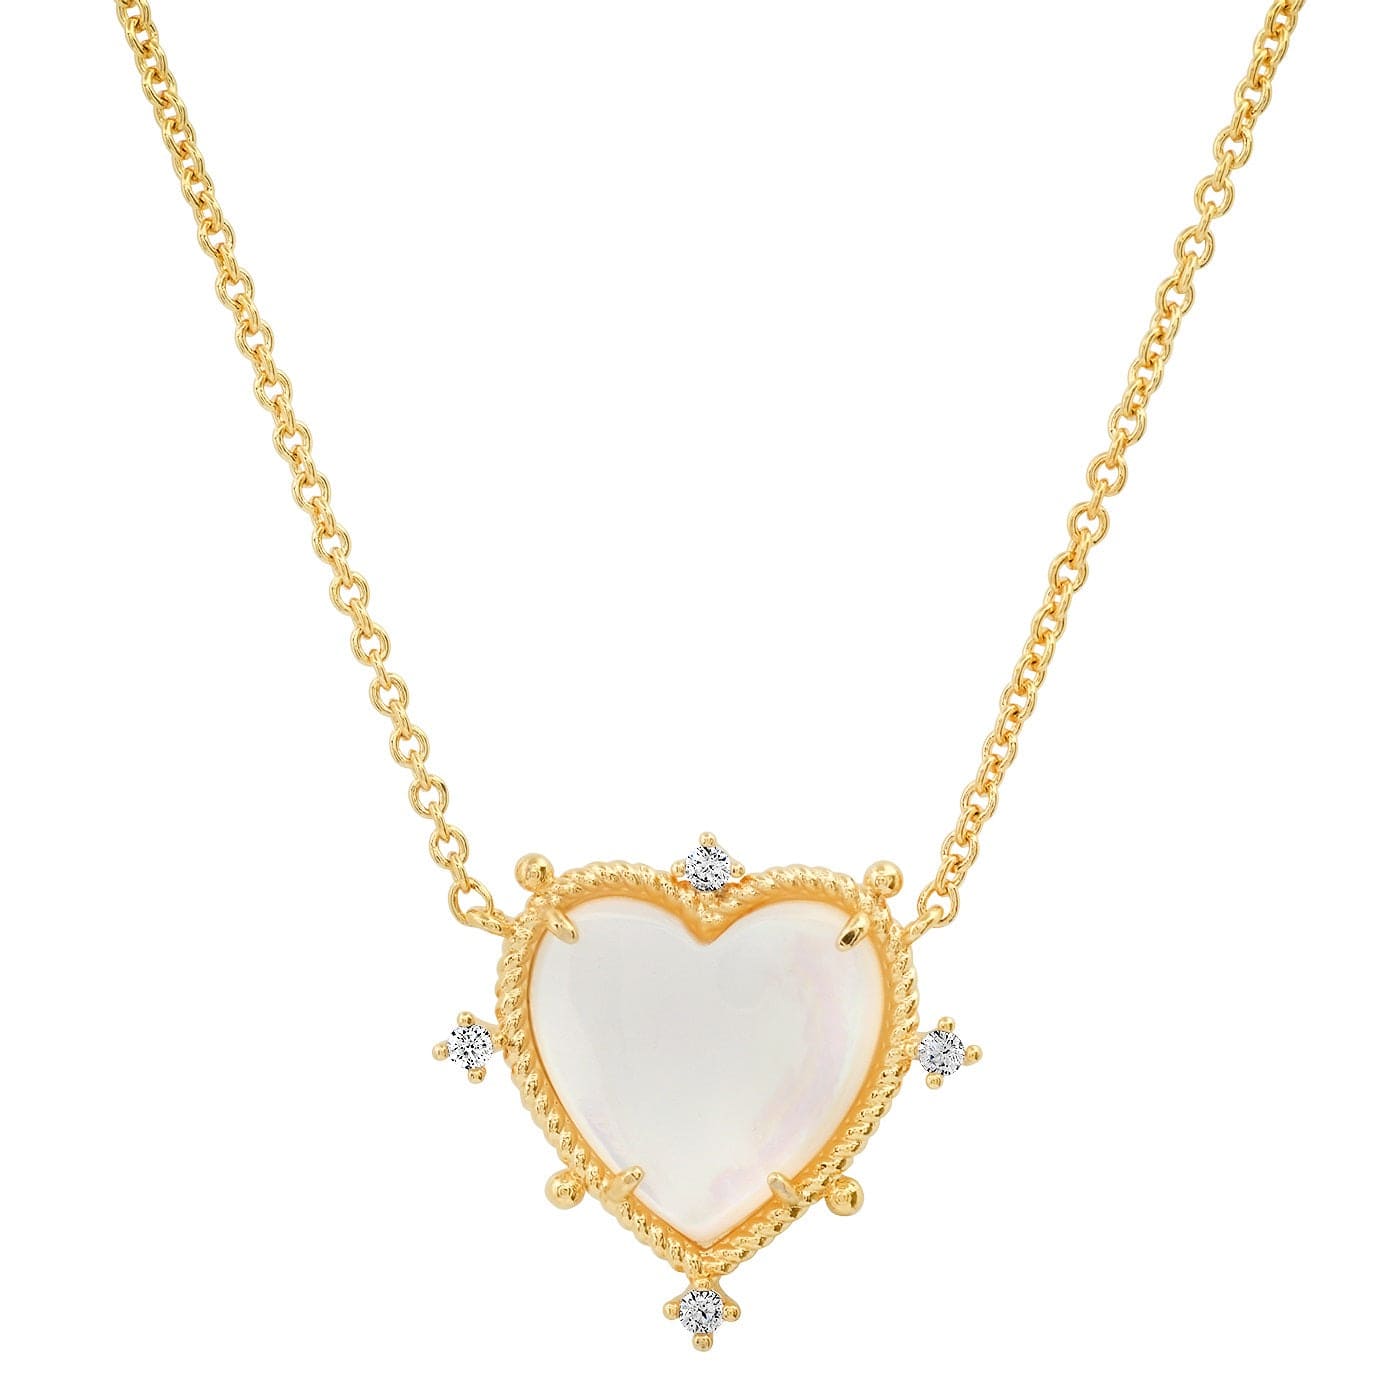 TAI JEWELRY Necklace Mother of Pearl Heart Necklace